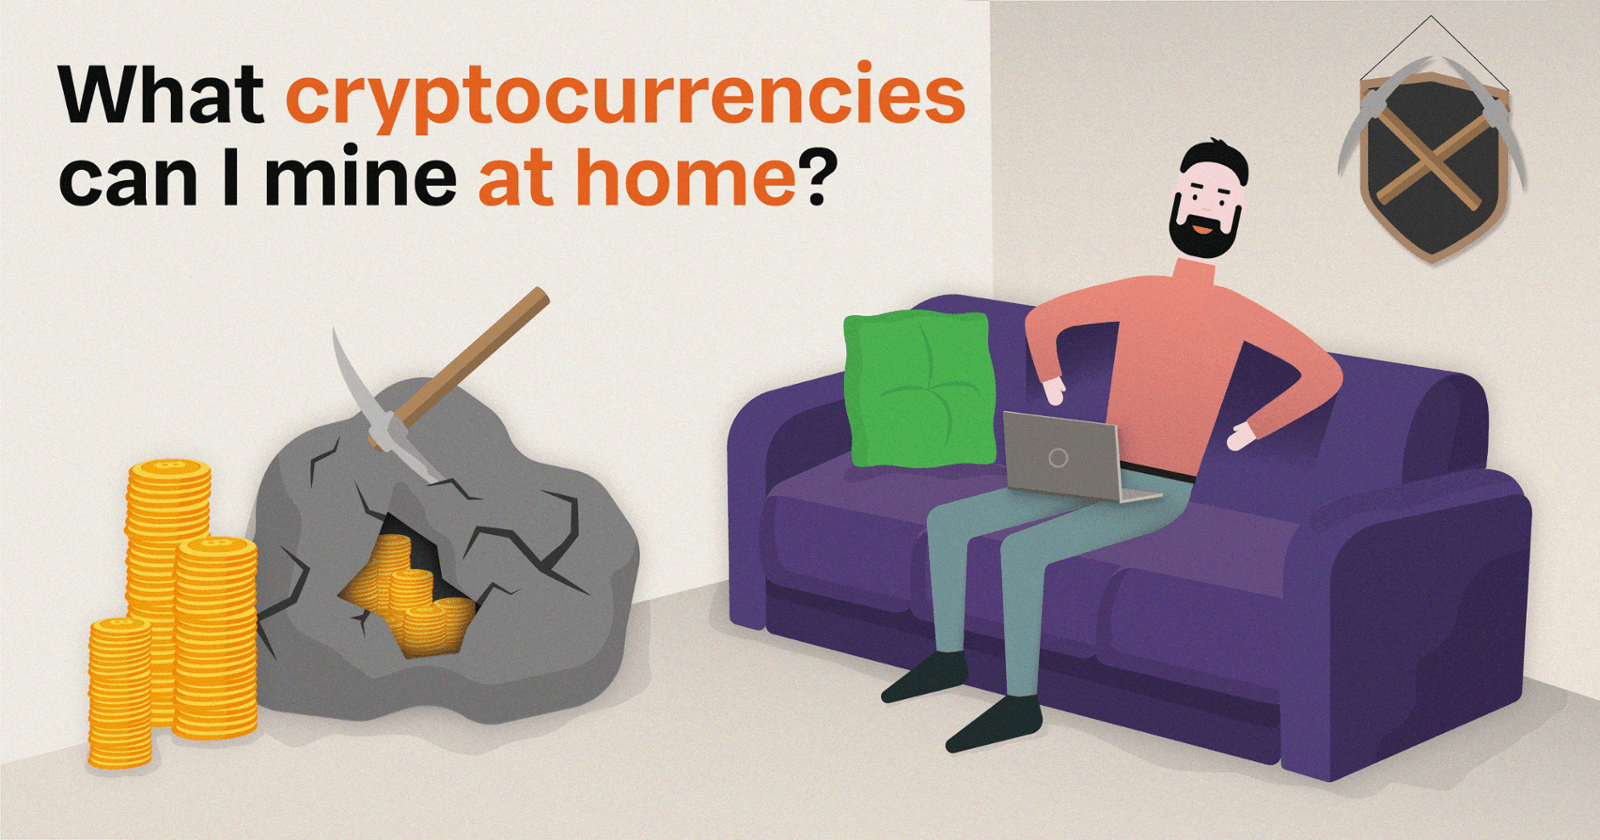 What cryptocurrencies can I mine at home?